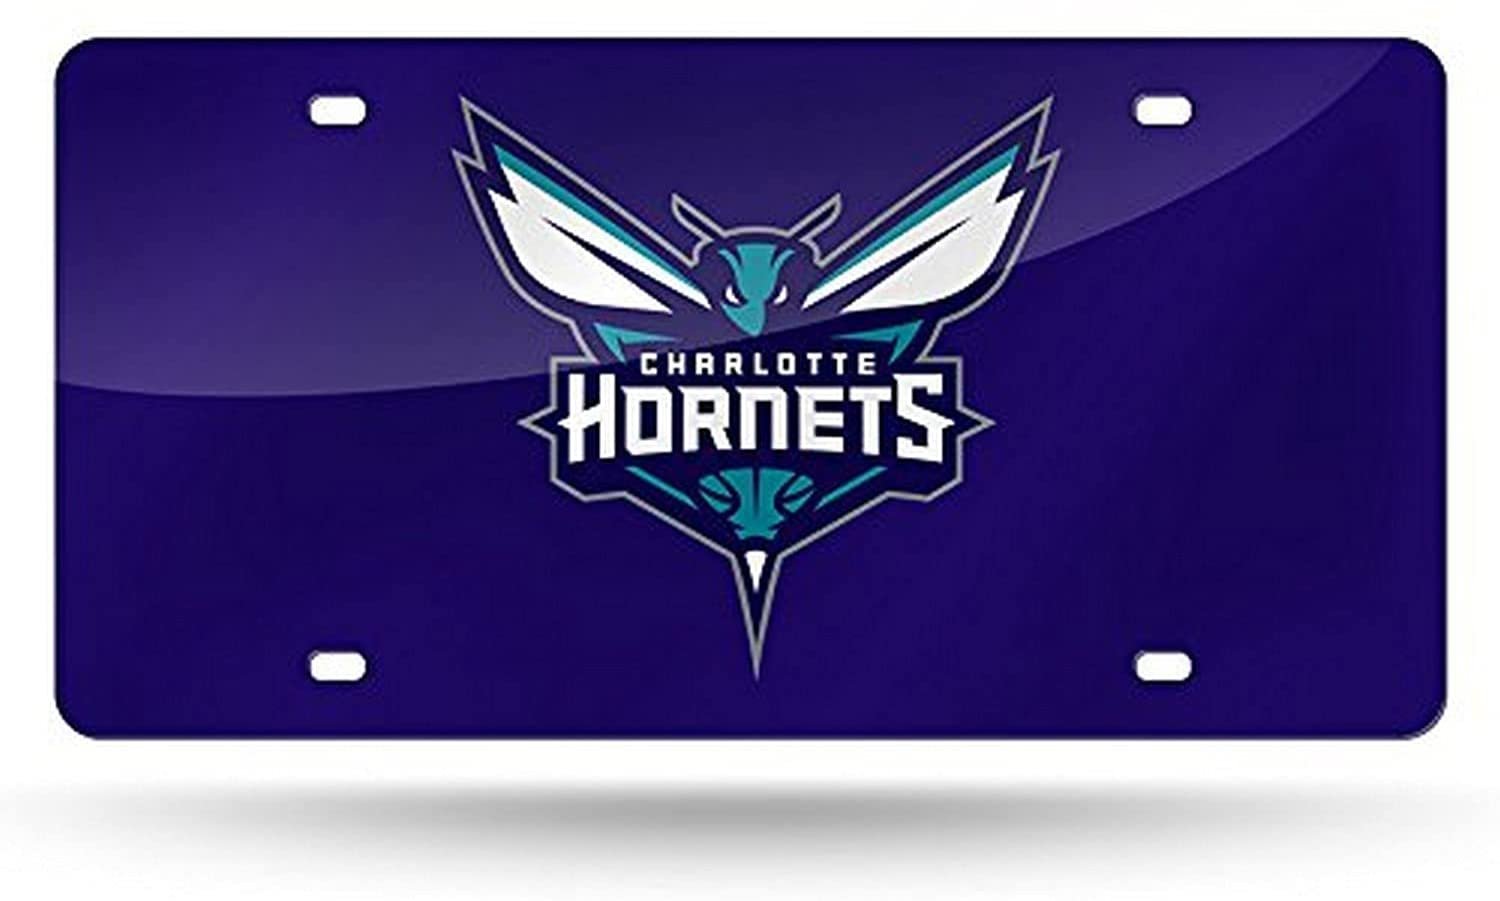 Charlotte Hornets Premium Laser Cut Tag License Plate, Mirrored Acrylic Inlaid, 6x12 Inch